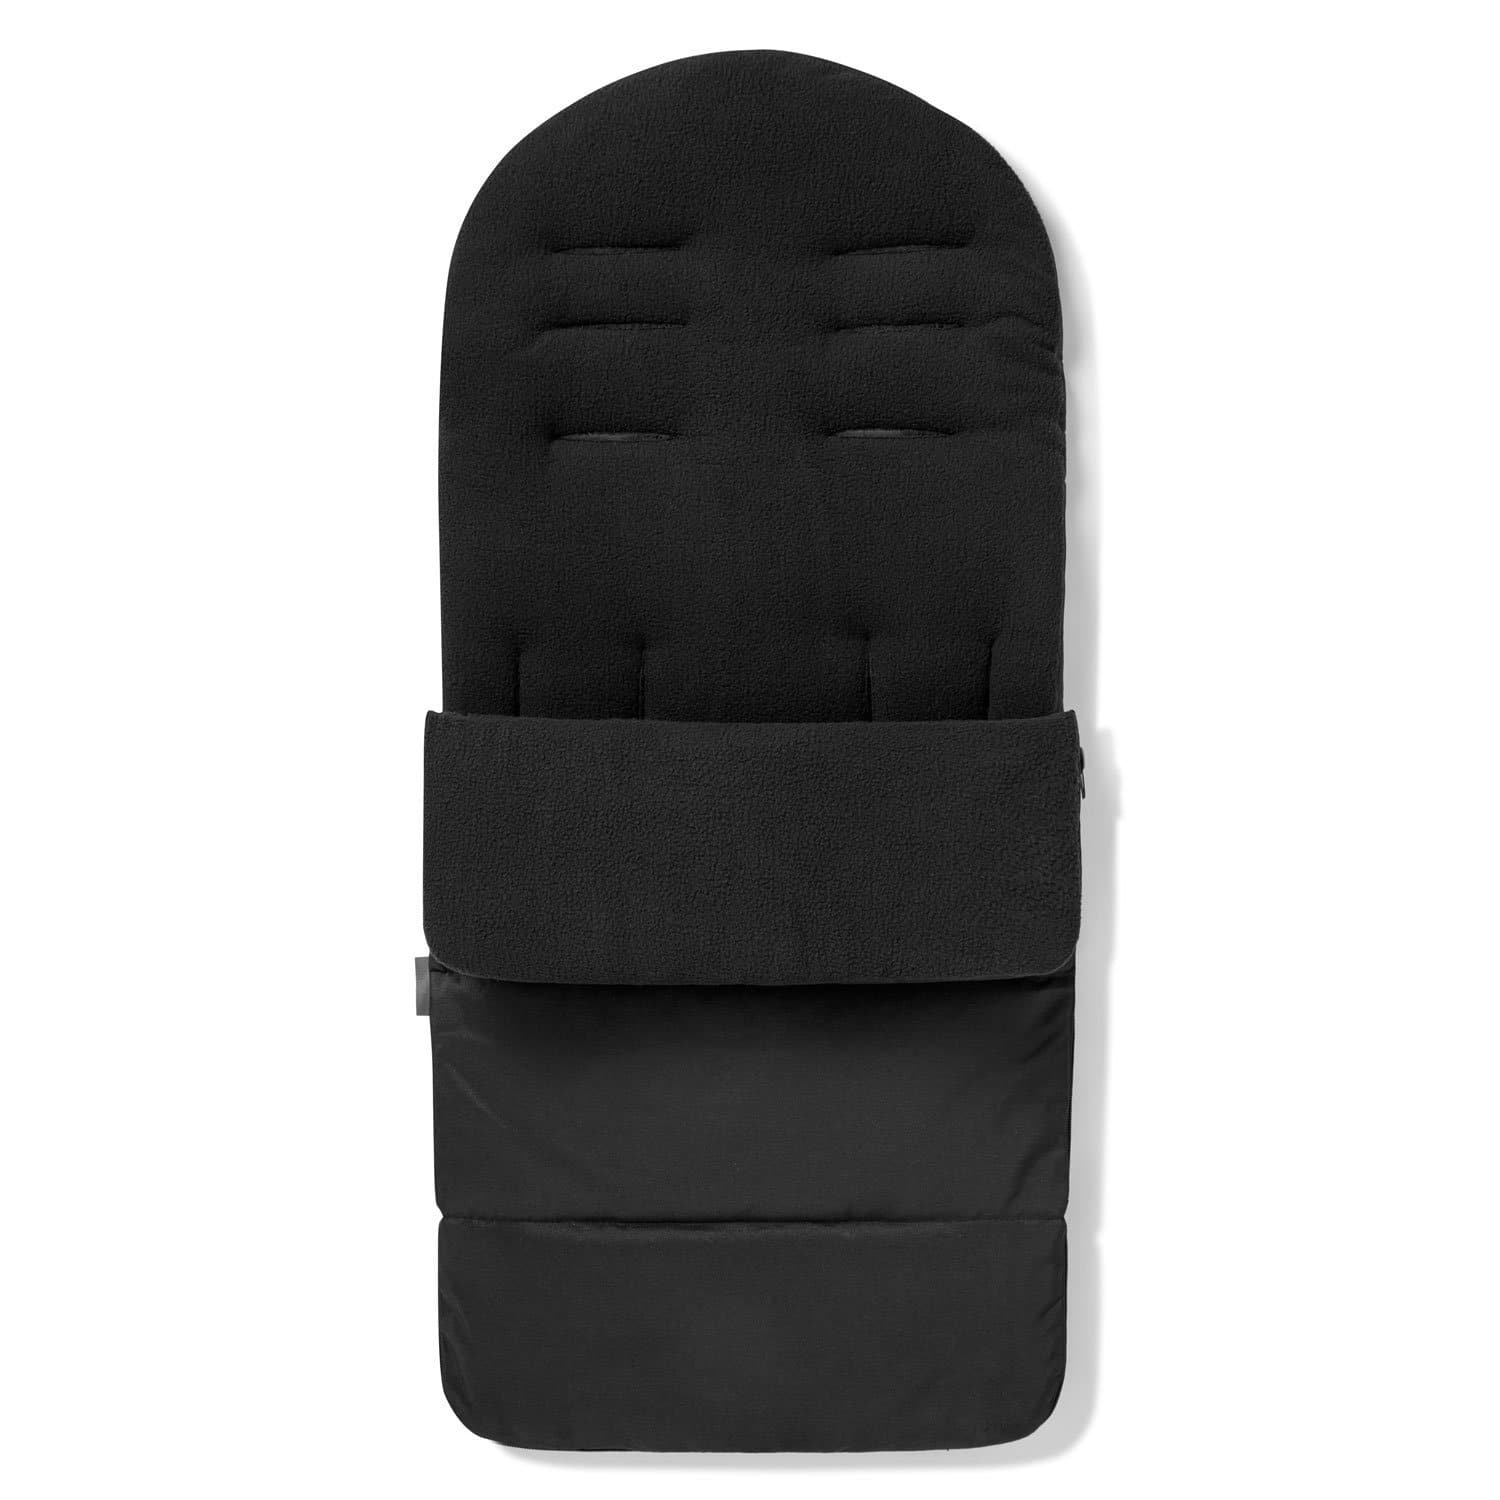 Premium Footmuff / Cosy Toes Compatible with Babywelt - Black Jack / Fits All Models | For Your Little One